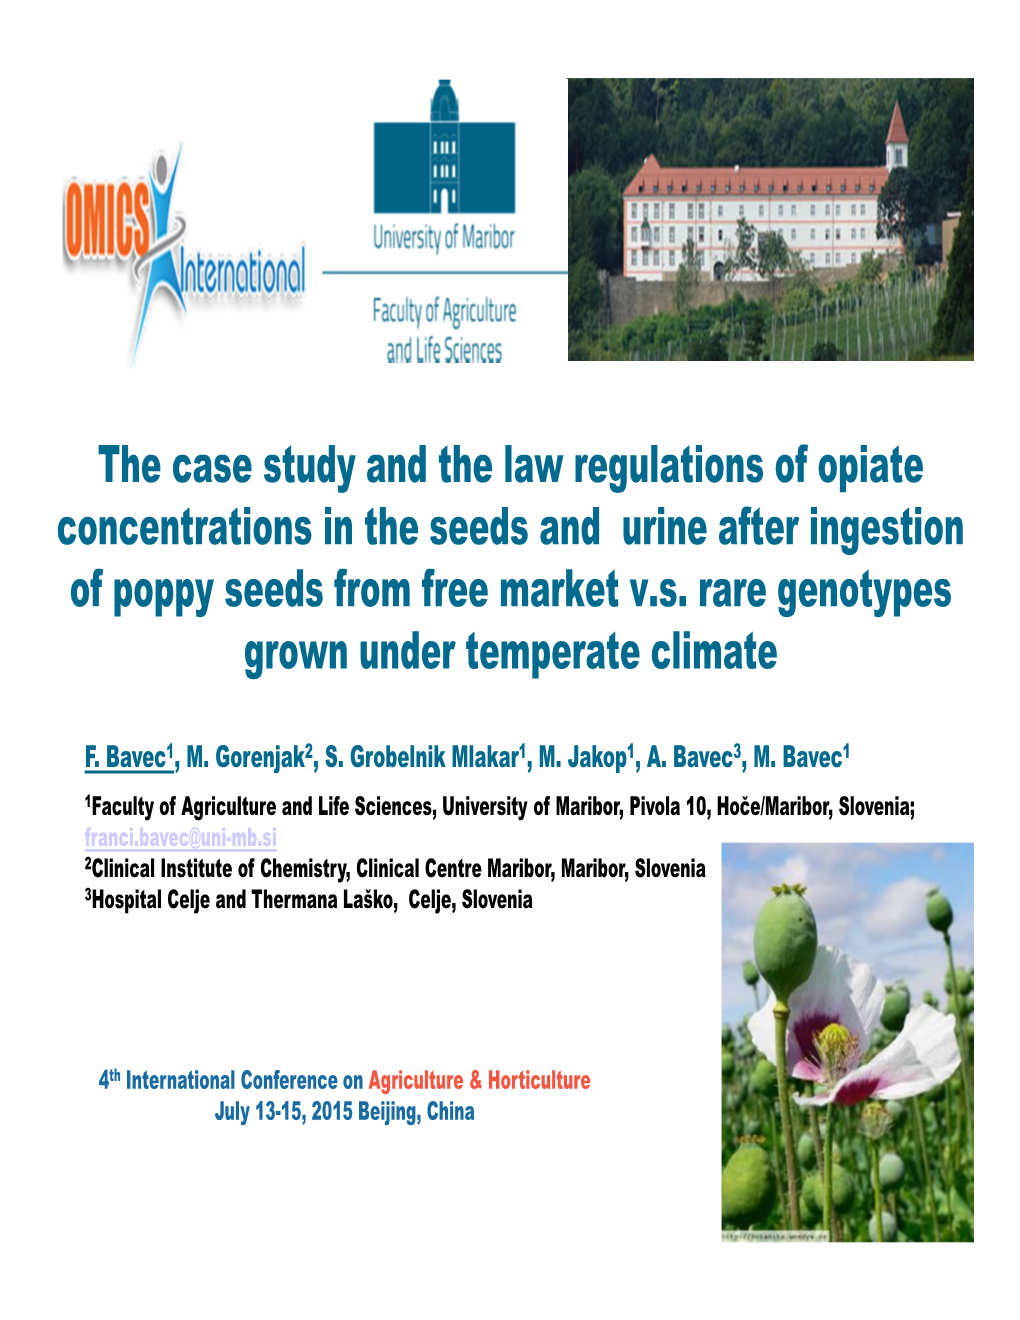 The Case Study and the Law Regulations of Opiate Concentrations in the Seeds and Urine After Ingestion of Poppy Seeds from Free Market V.S